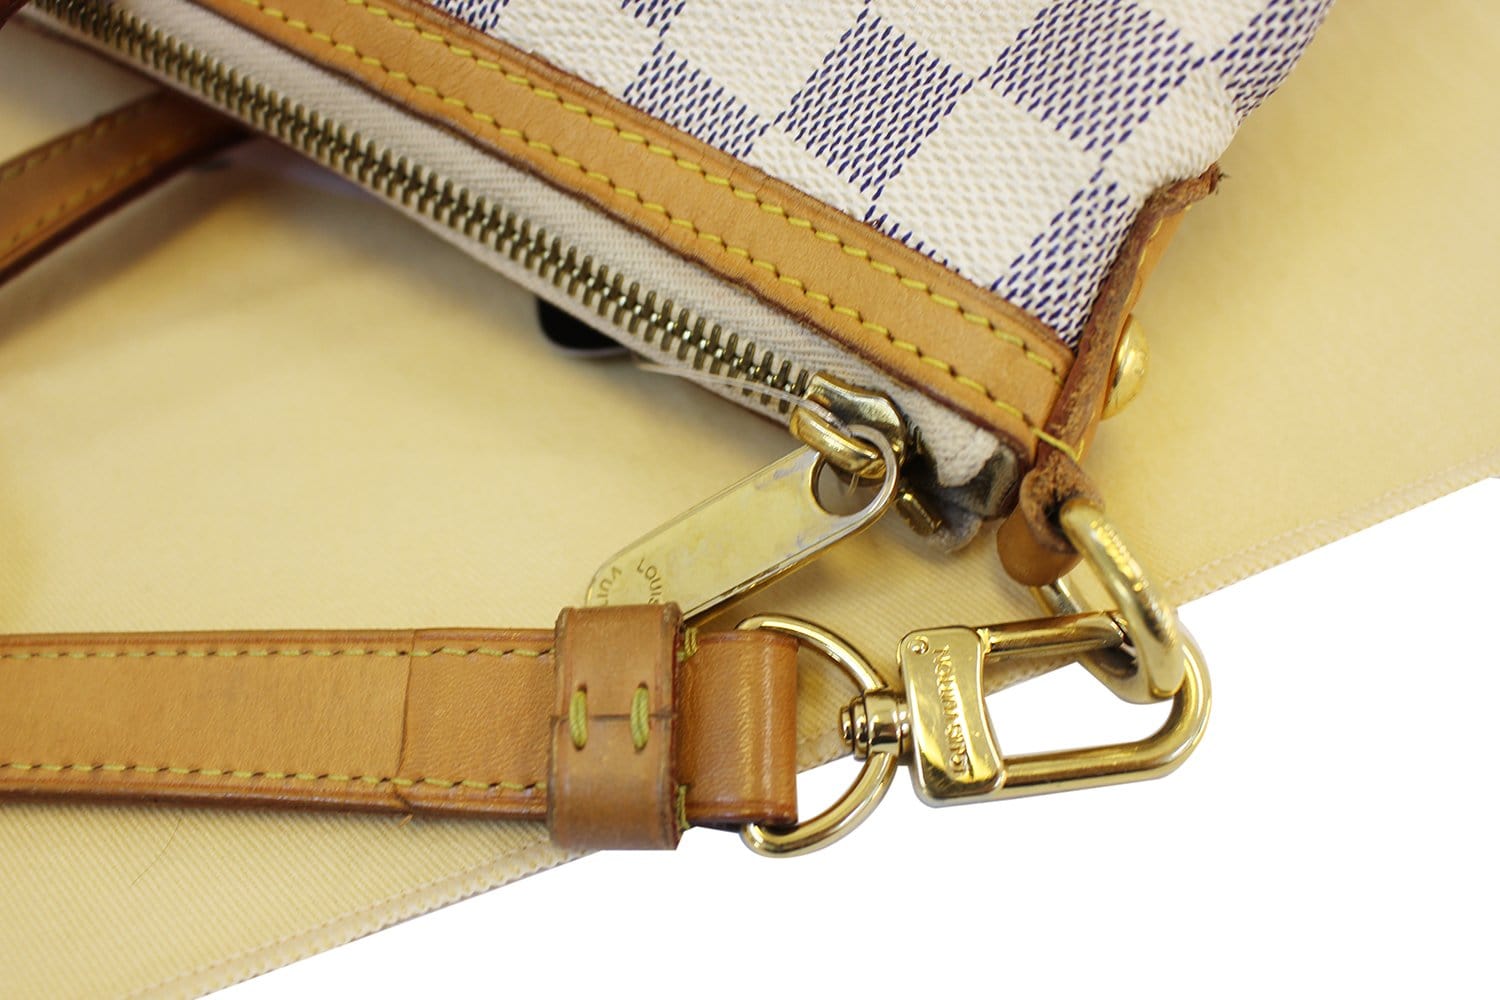 SOLD. Louis Vuitton Damier Azur Siracusa GM Bag. Very good condition. With  long strap and dust bag.